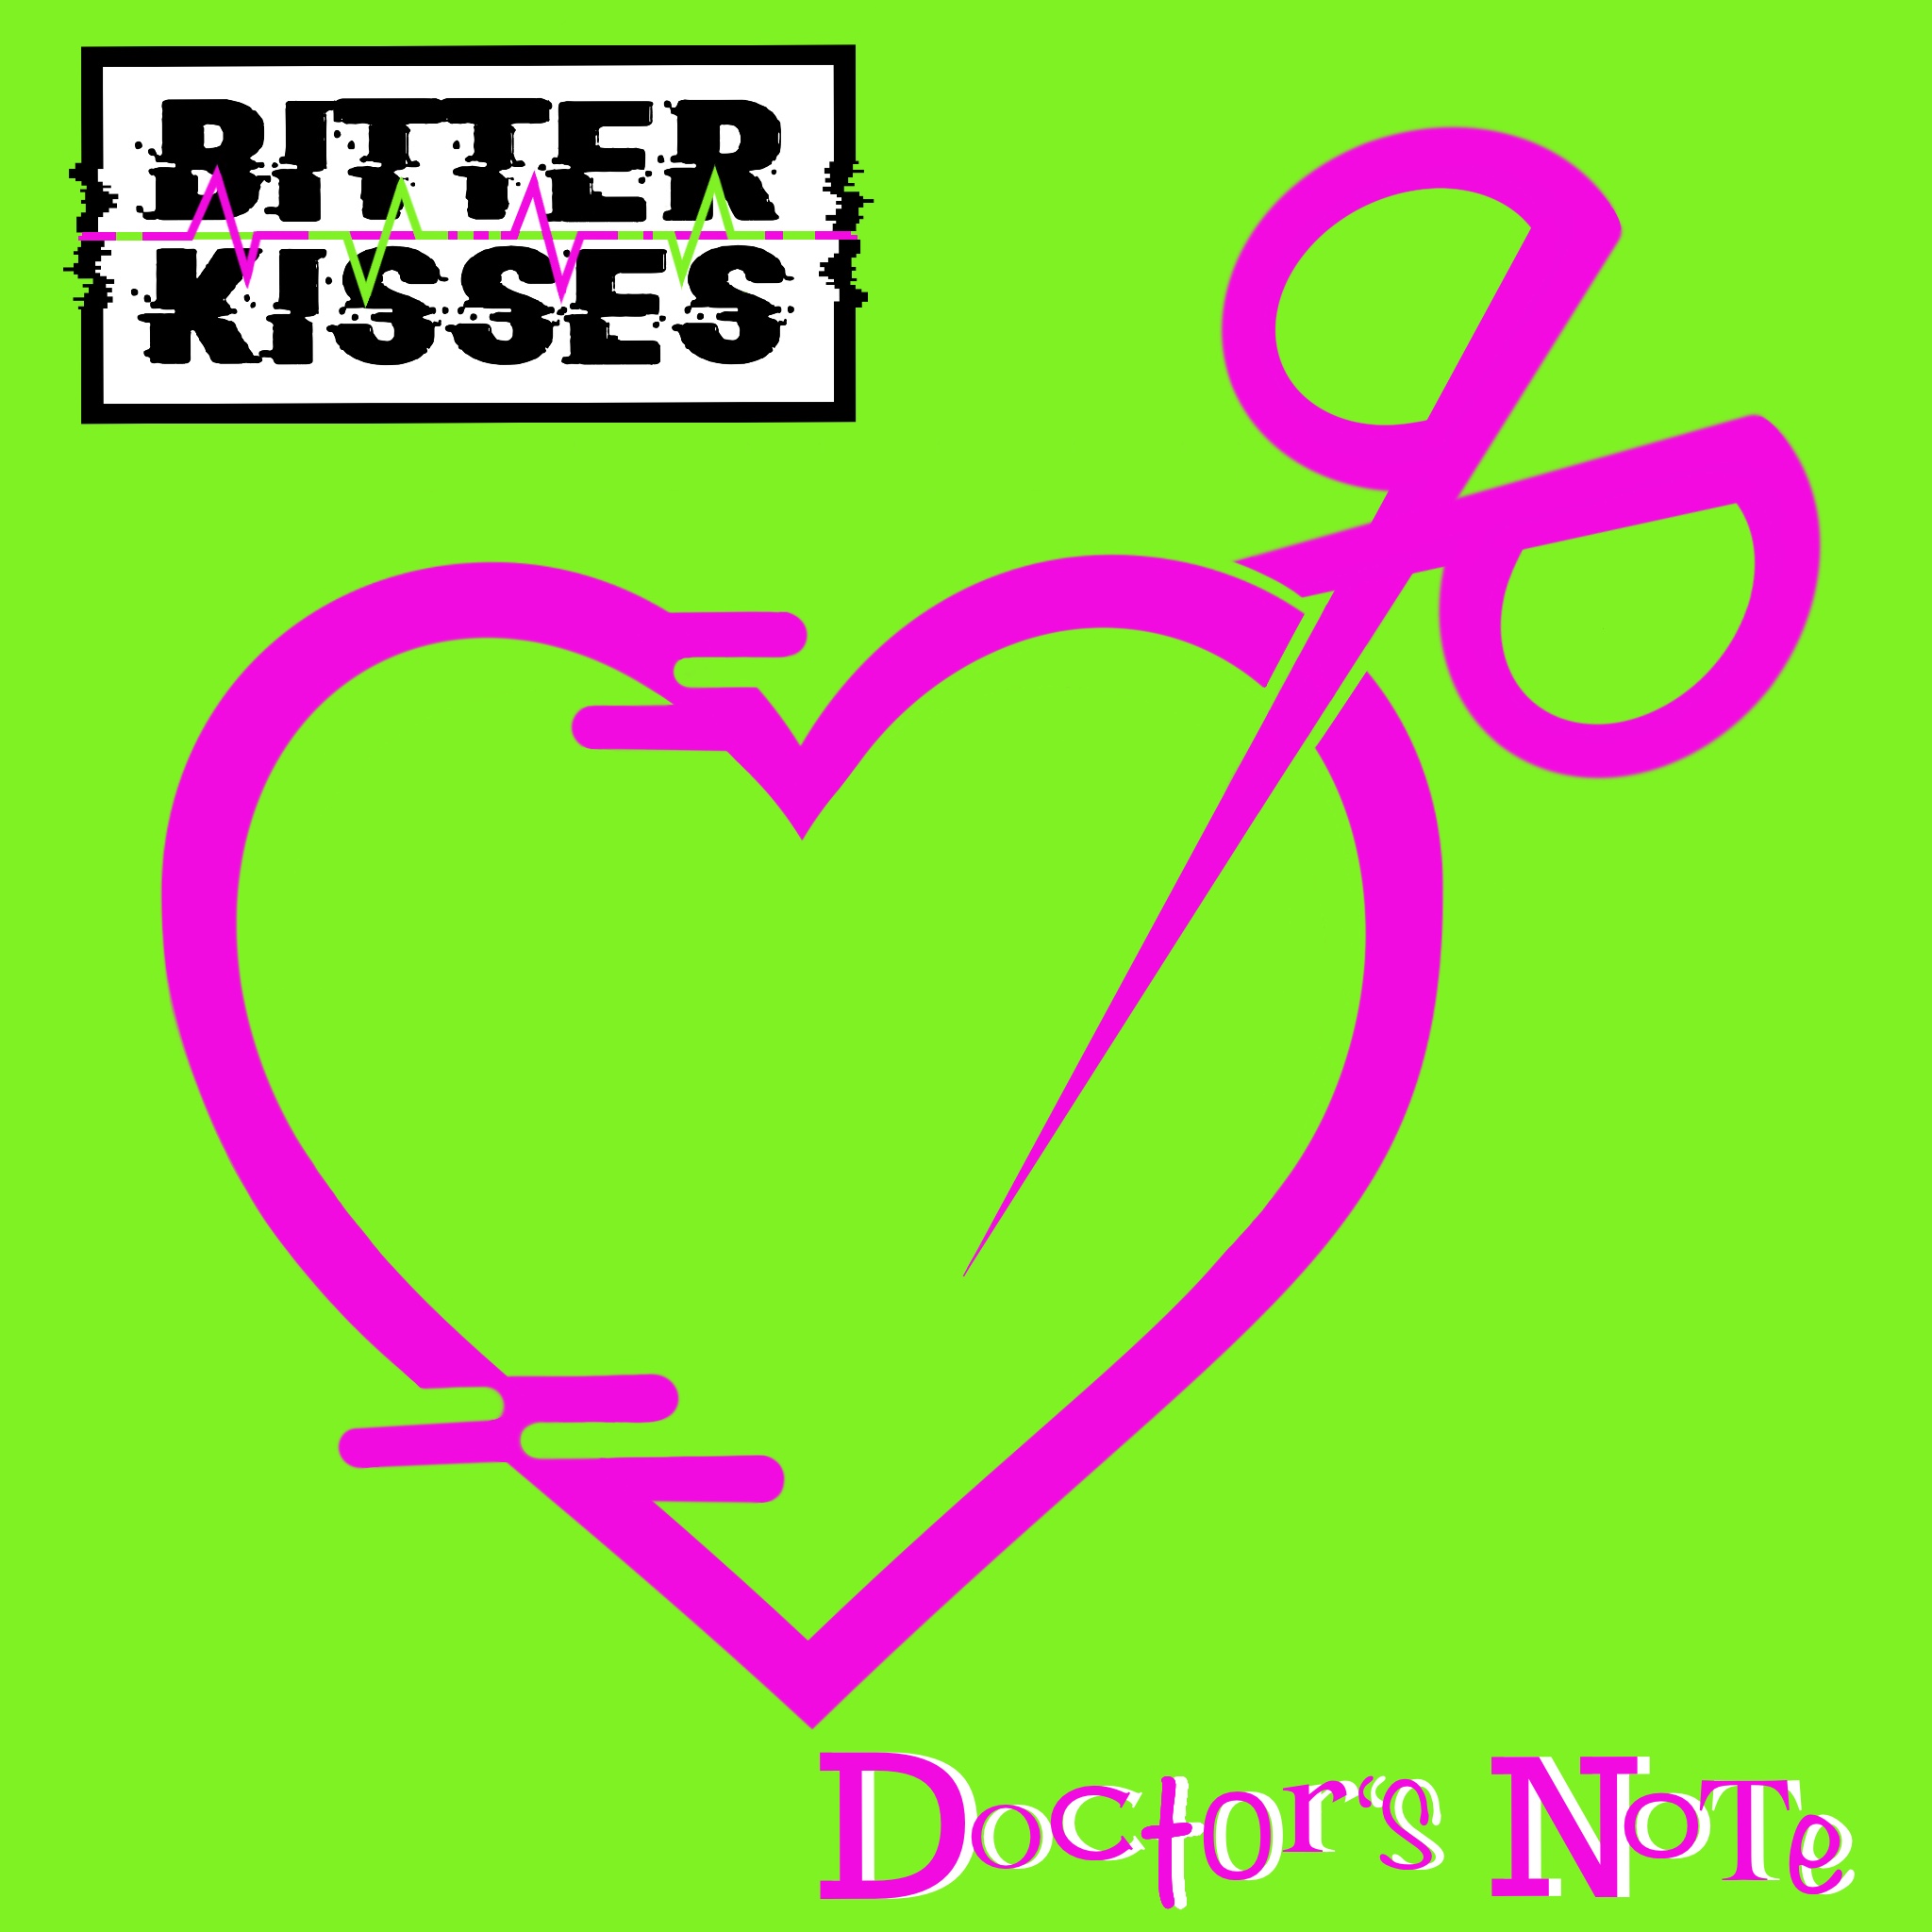 HOT TRACK: “Doctor’s Note” by Bitter Kisses